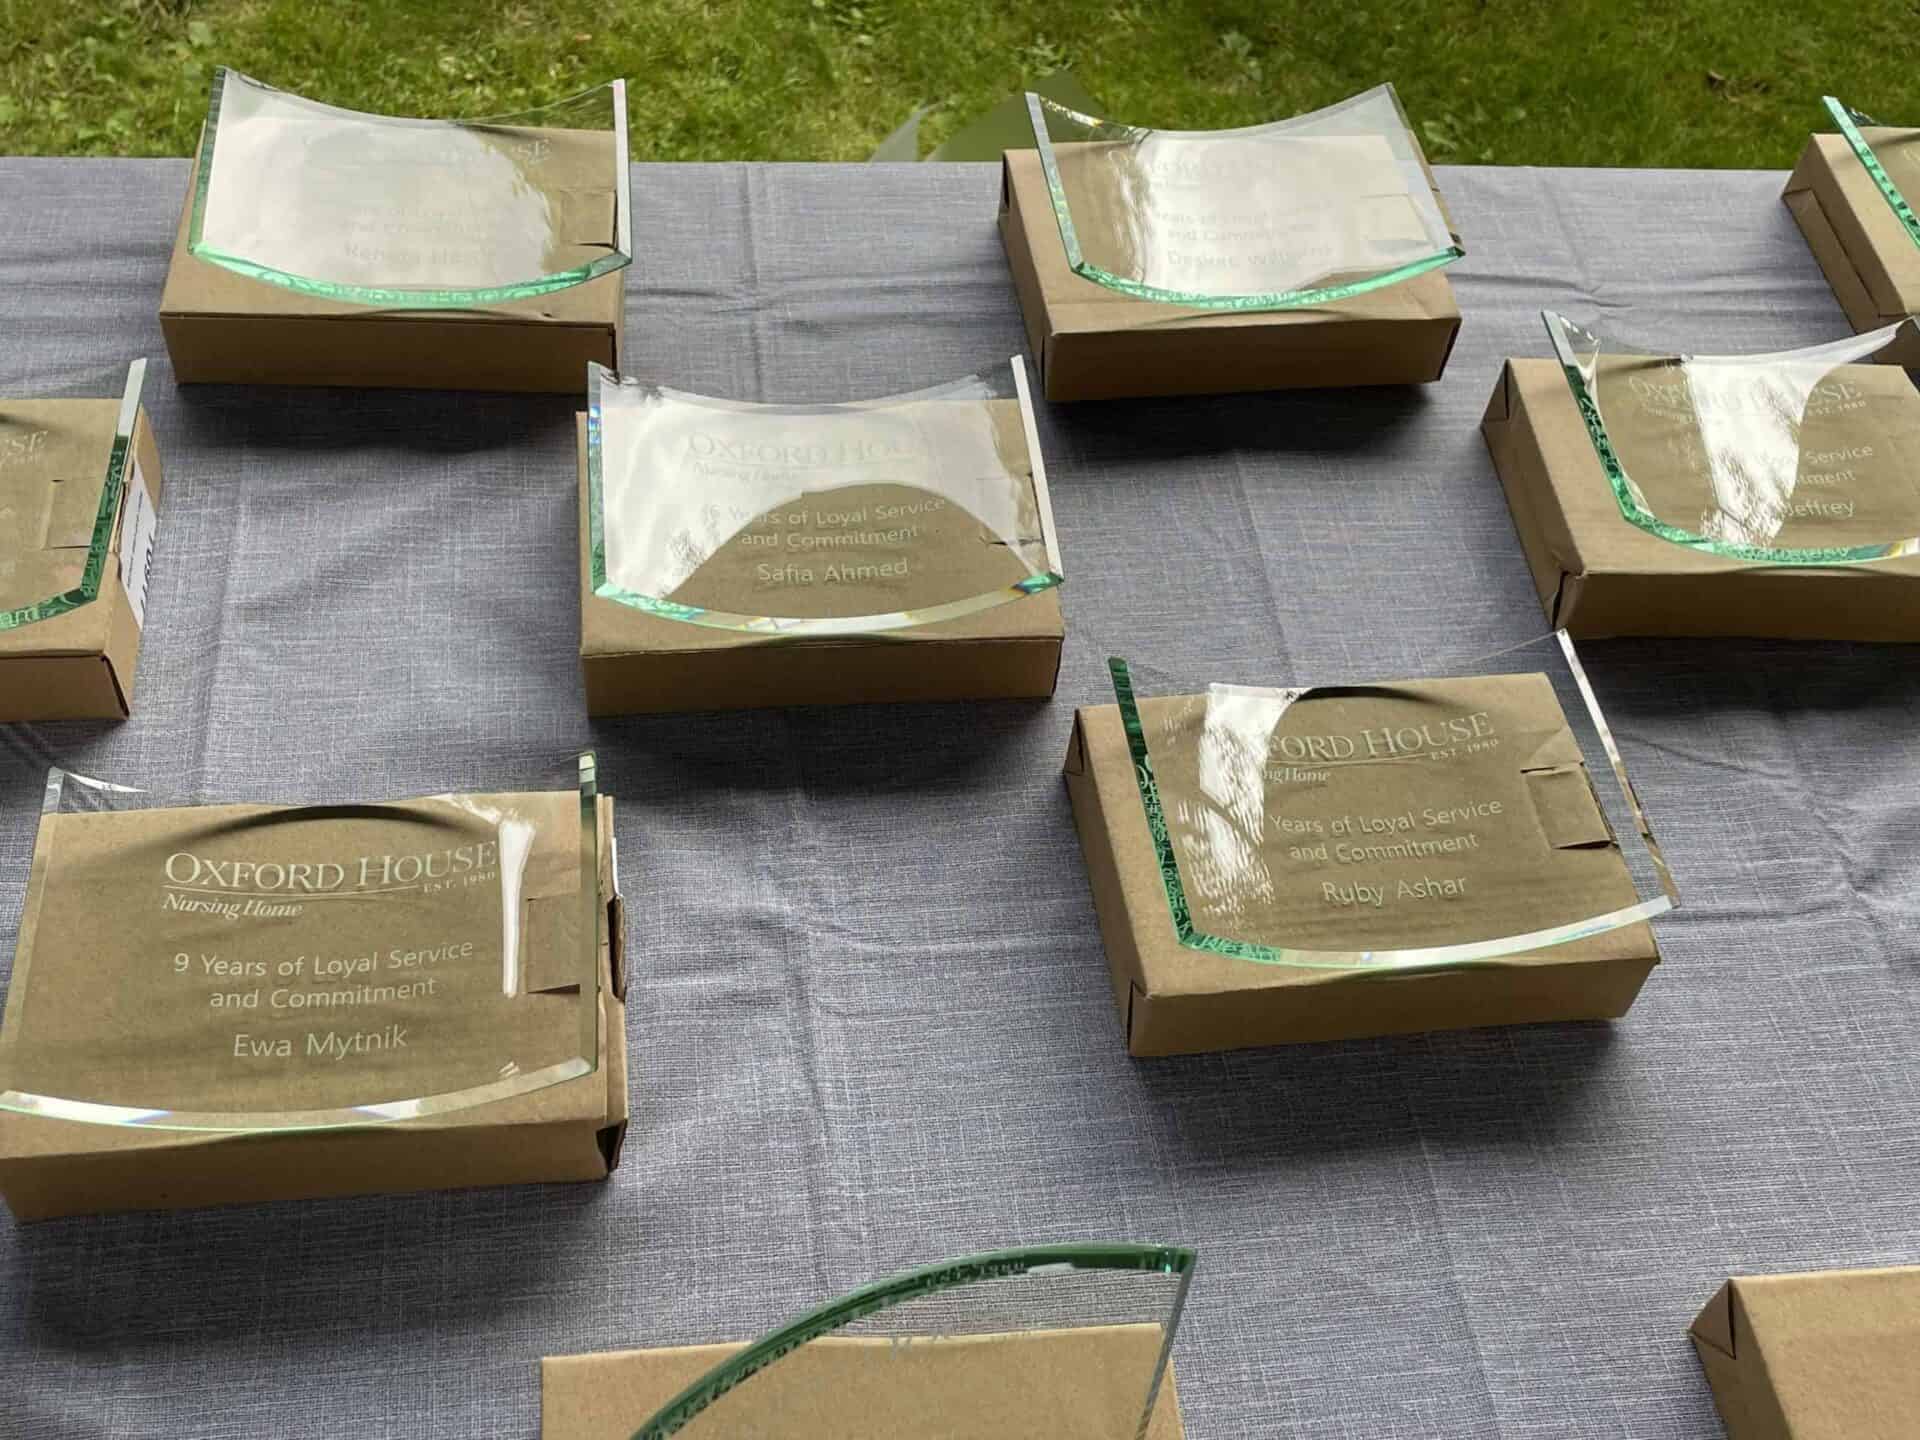 Plaques of appreciation with names displayed on a table, celebrating years of loyal service and commitment among Nursing Home Staff.